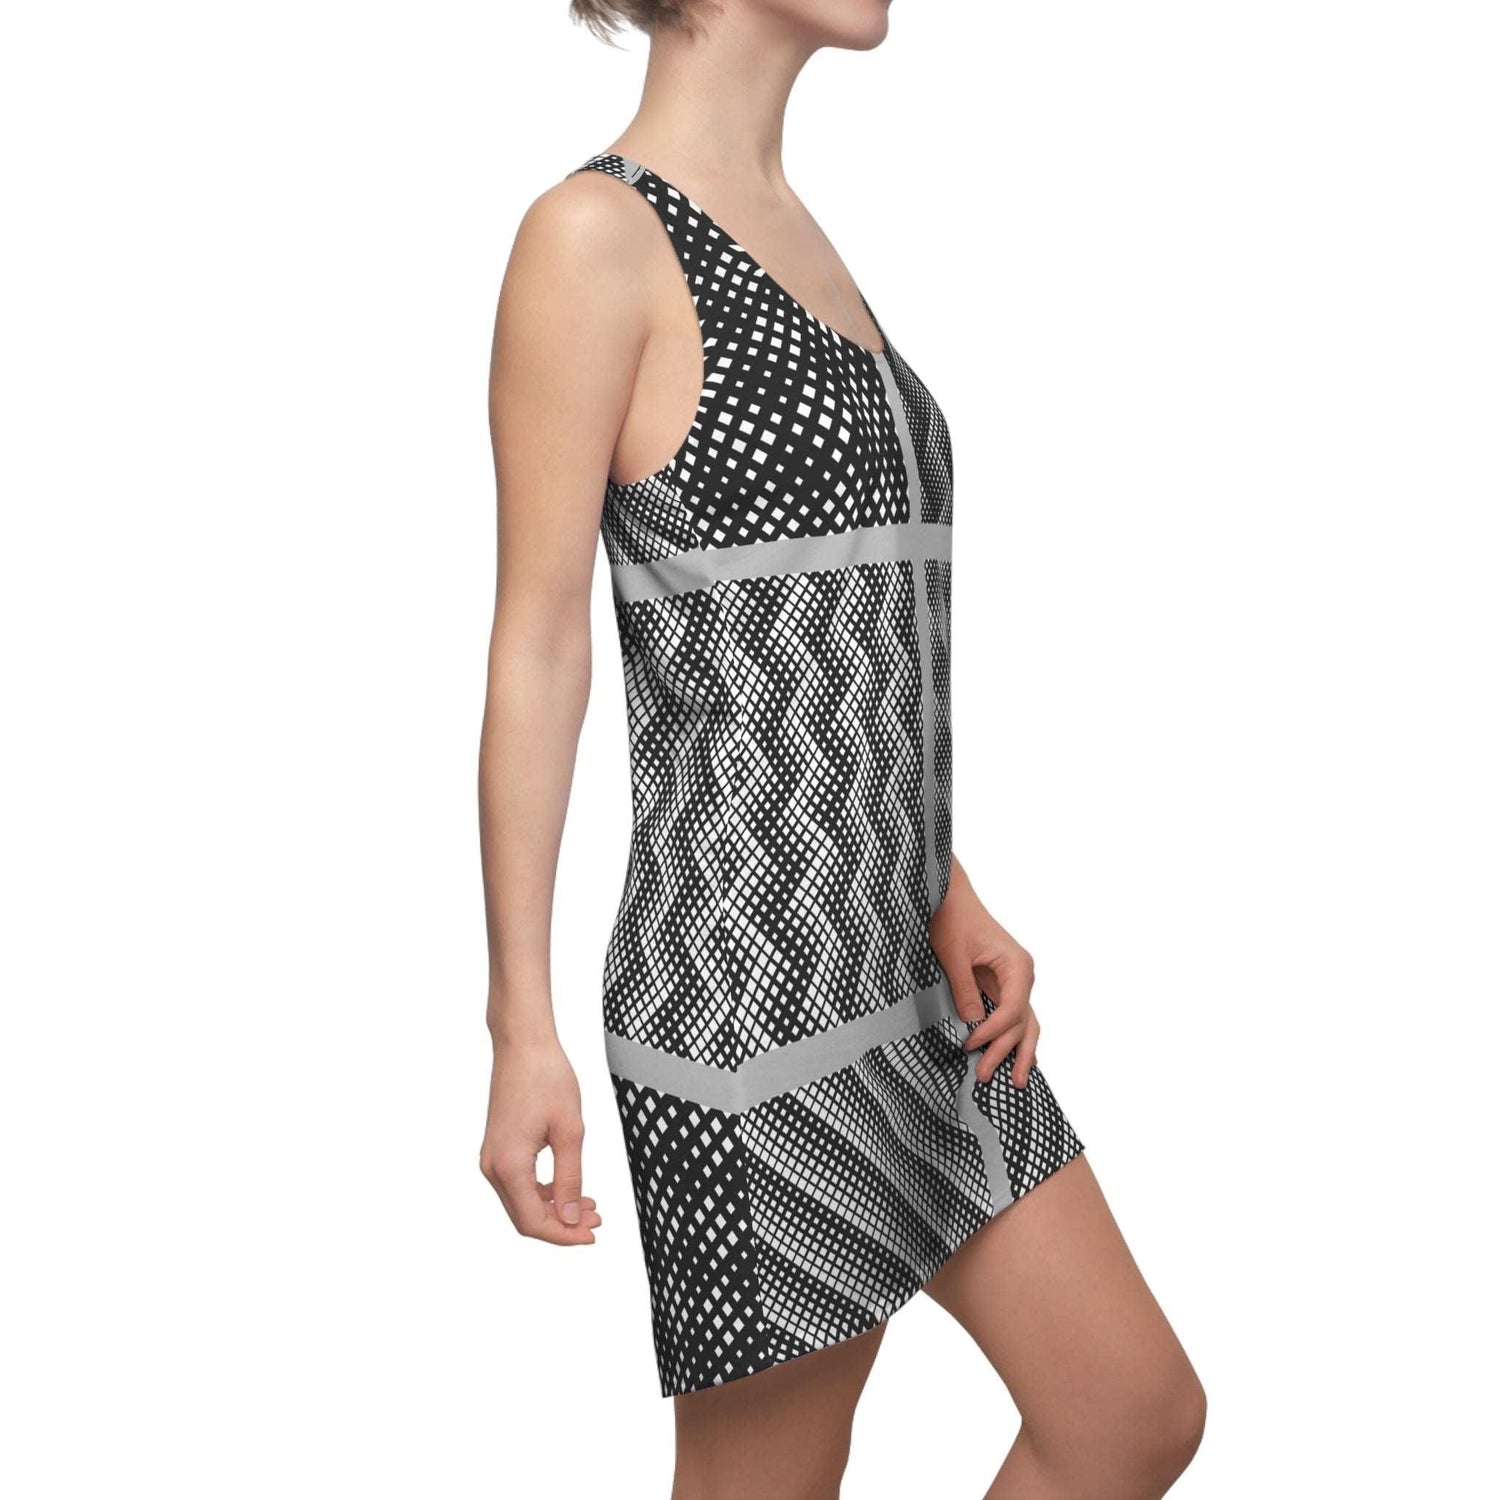 Black and White Graphic Squares Women's Cut & Sew Racerback Dress